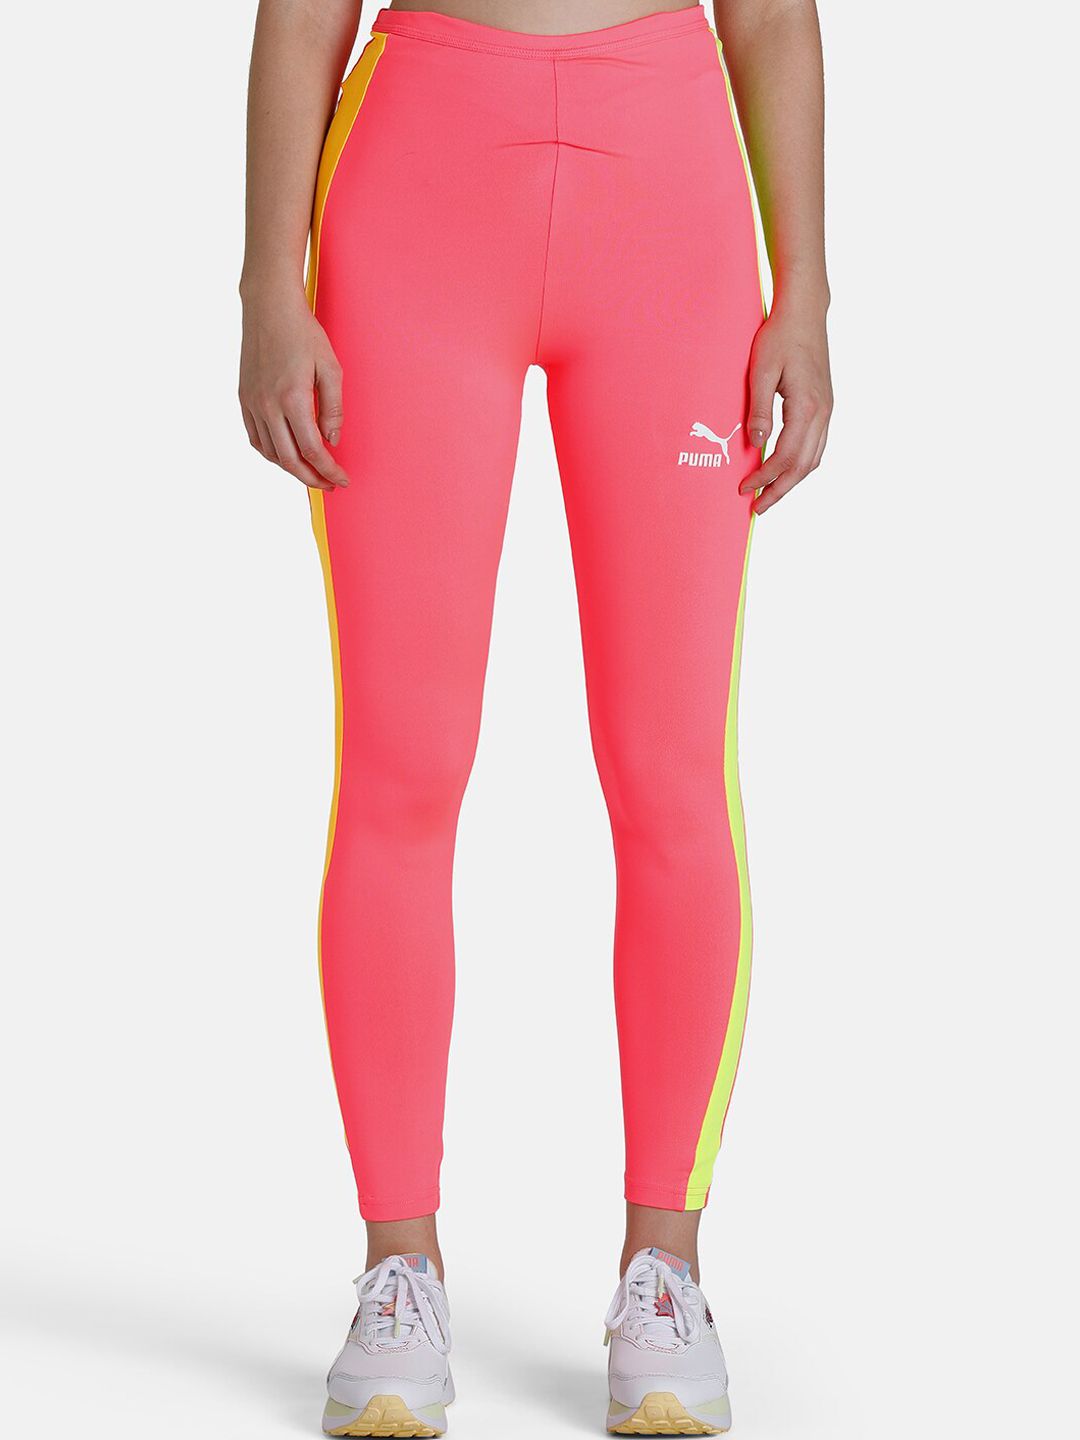 Puma Women Pink Solid Tight Fit Tights Price in India